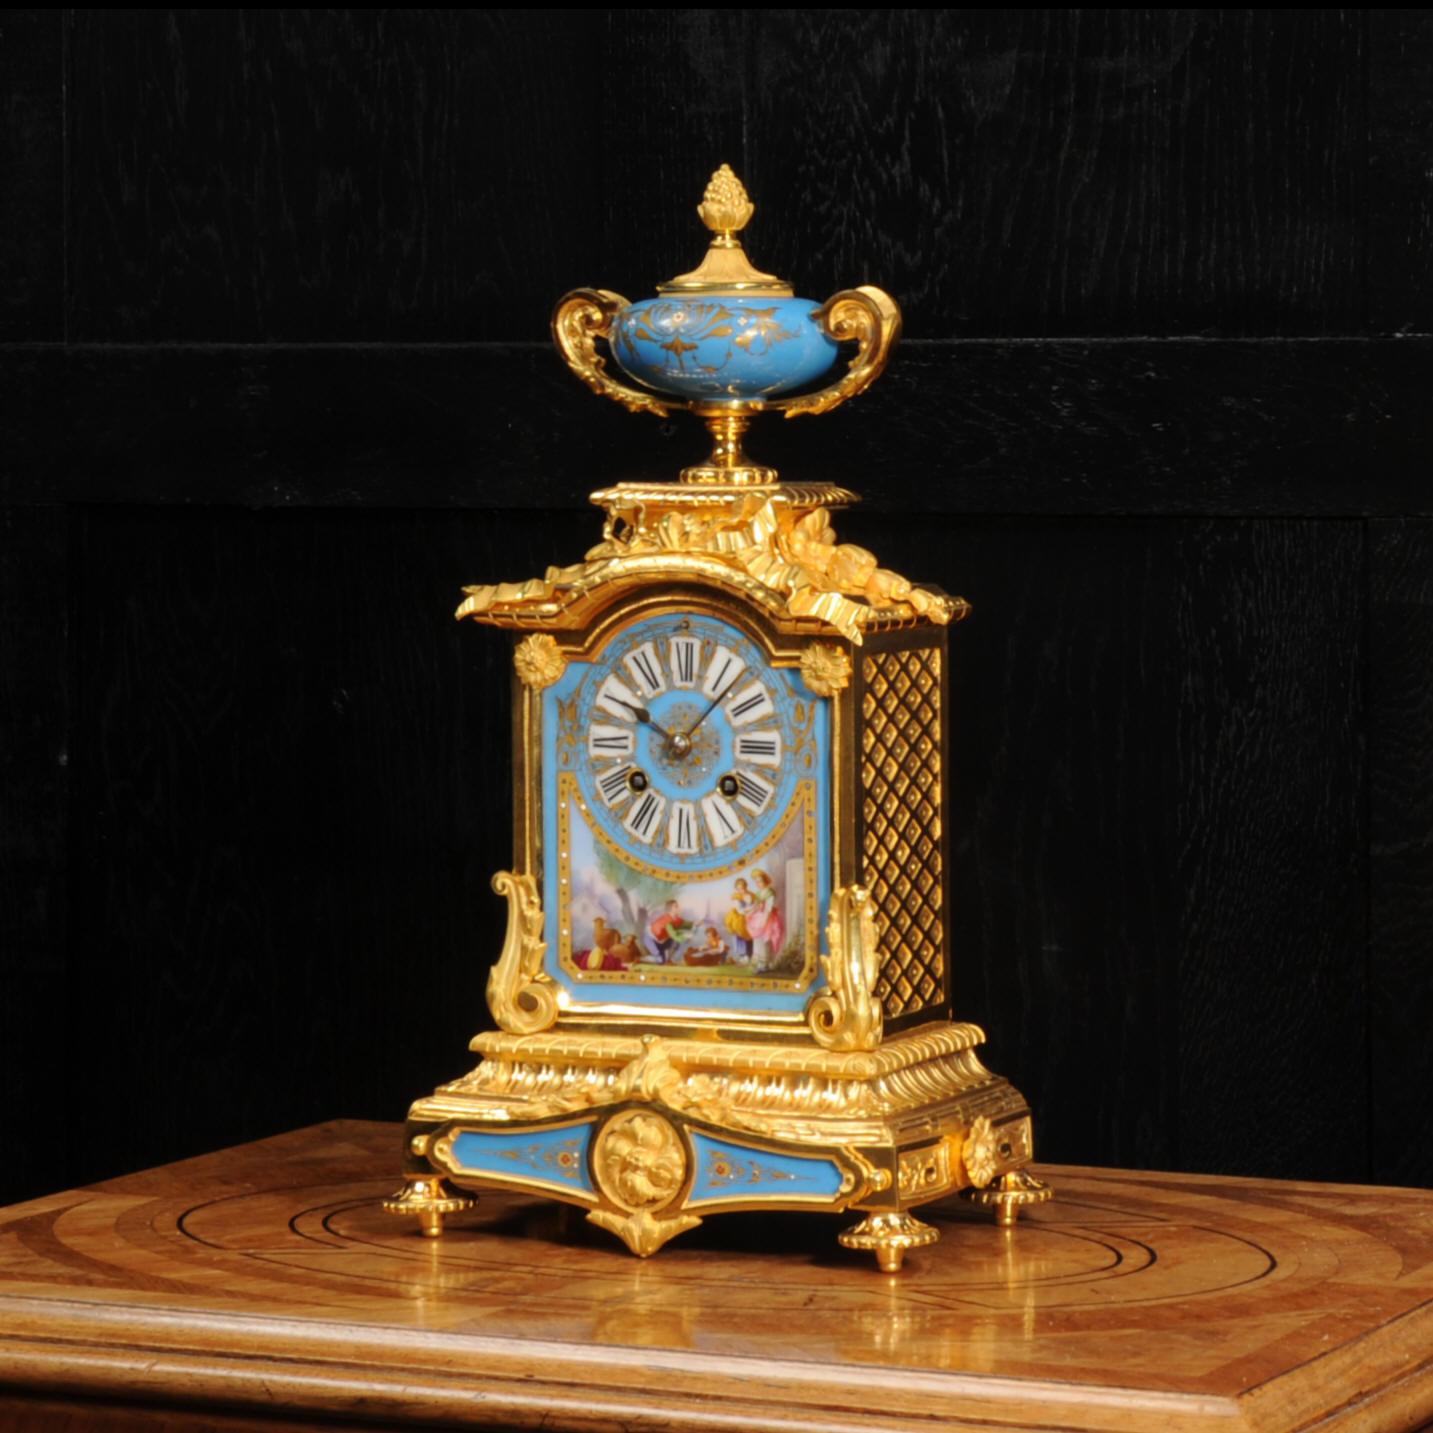 A fine and stunning original antique French boudoir clock. It is beautifully made of ormolu (finely gilded bronze), very well modelled and chased, and mounted with exquisite Serves style porcelain. The ormolu is in stunning, untouched, original